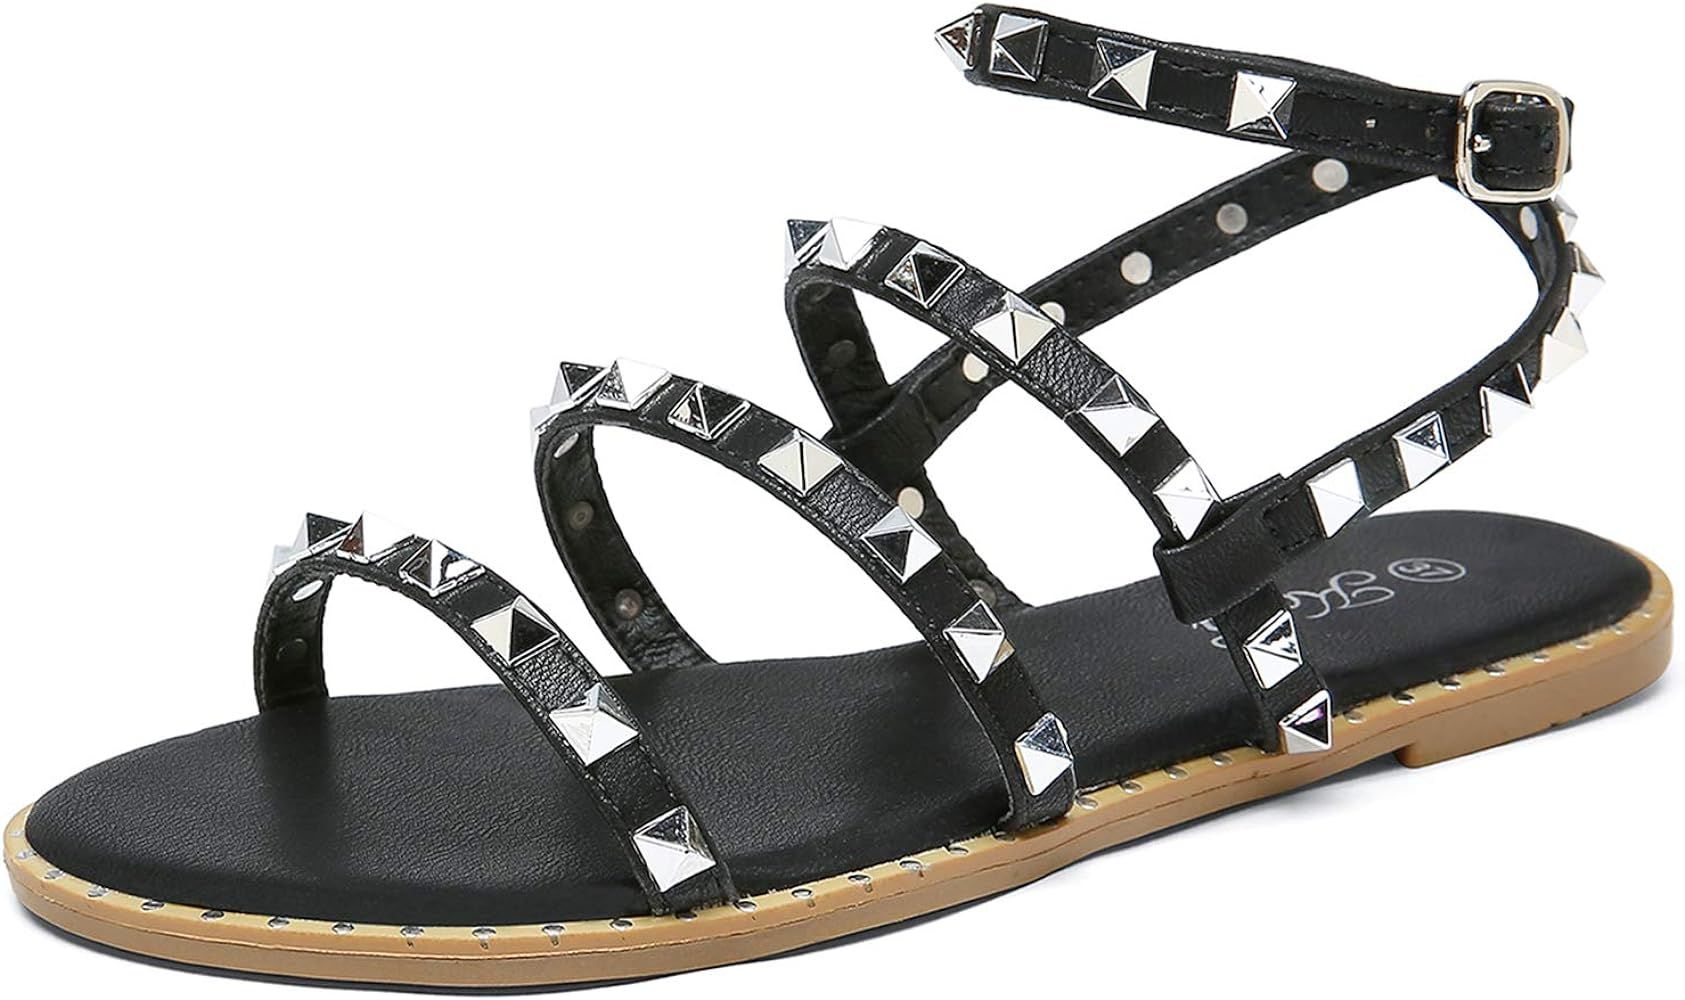 Katliu Women's Flat Sandals Strappy Studded Sandals Gladiator Sandals with Ankle Strap | Amazon (US)